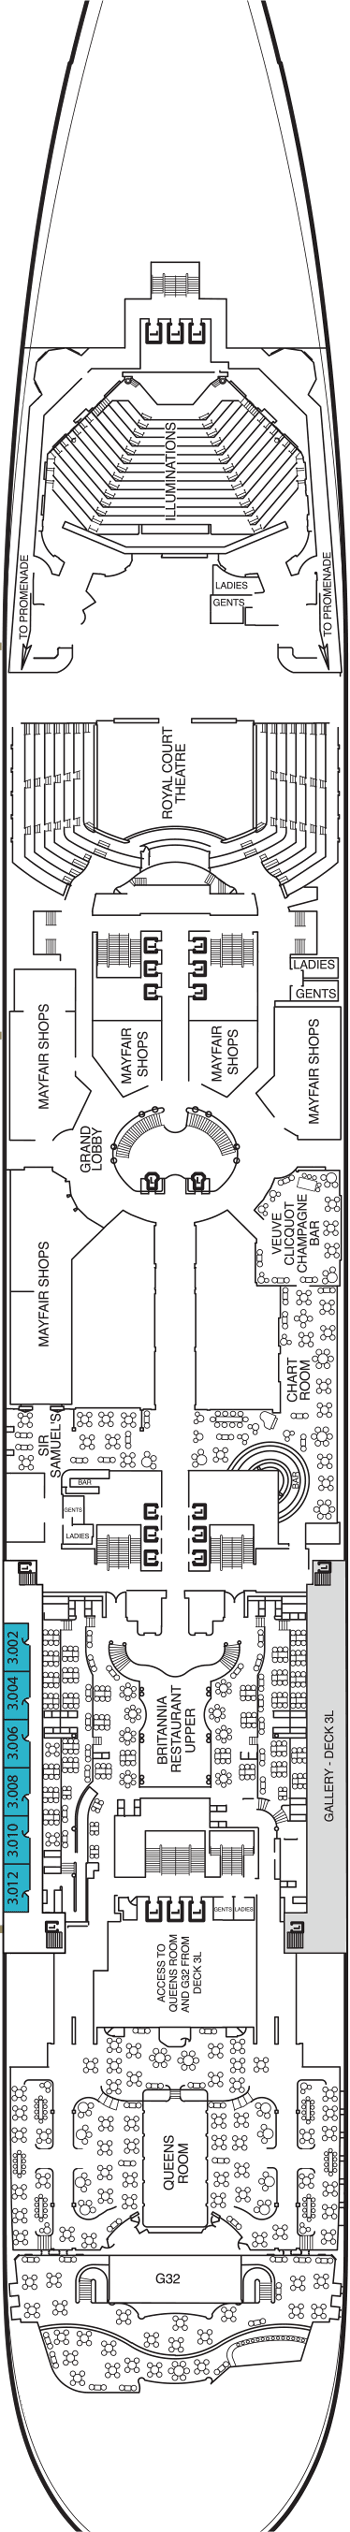 Queen Mary 2 Deck Plans